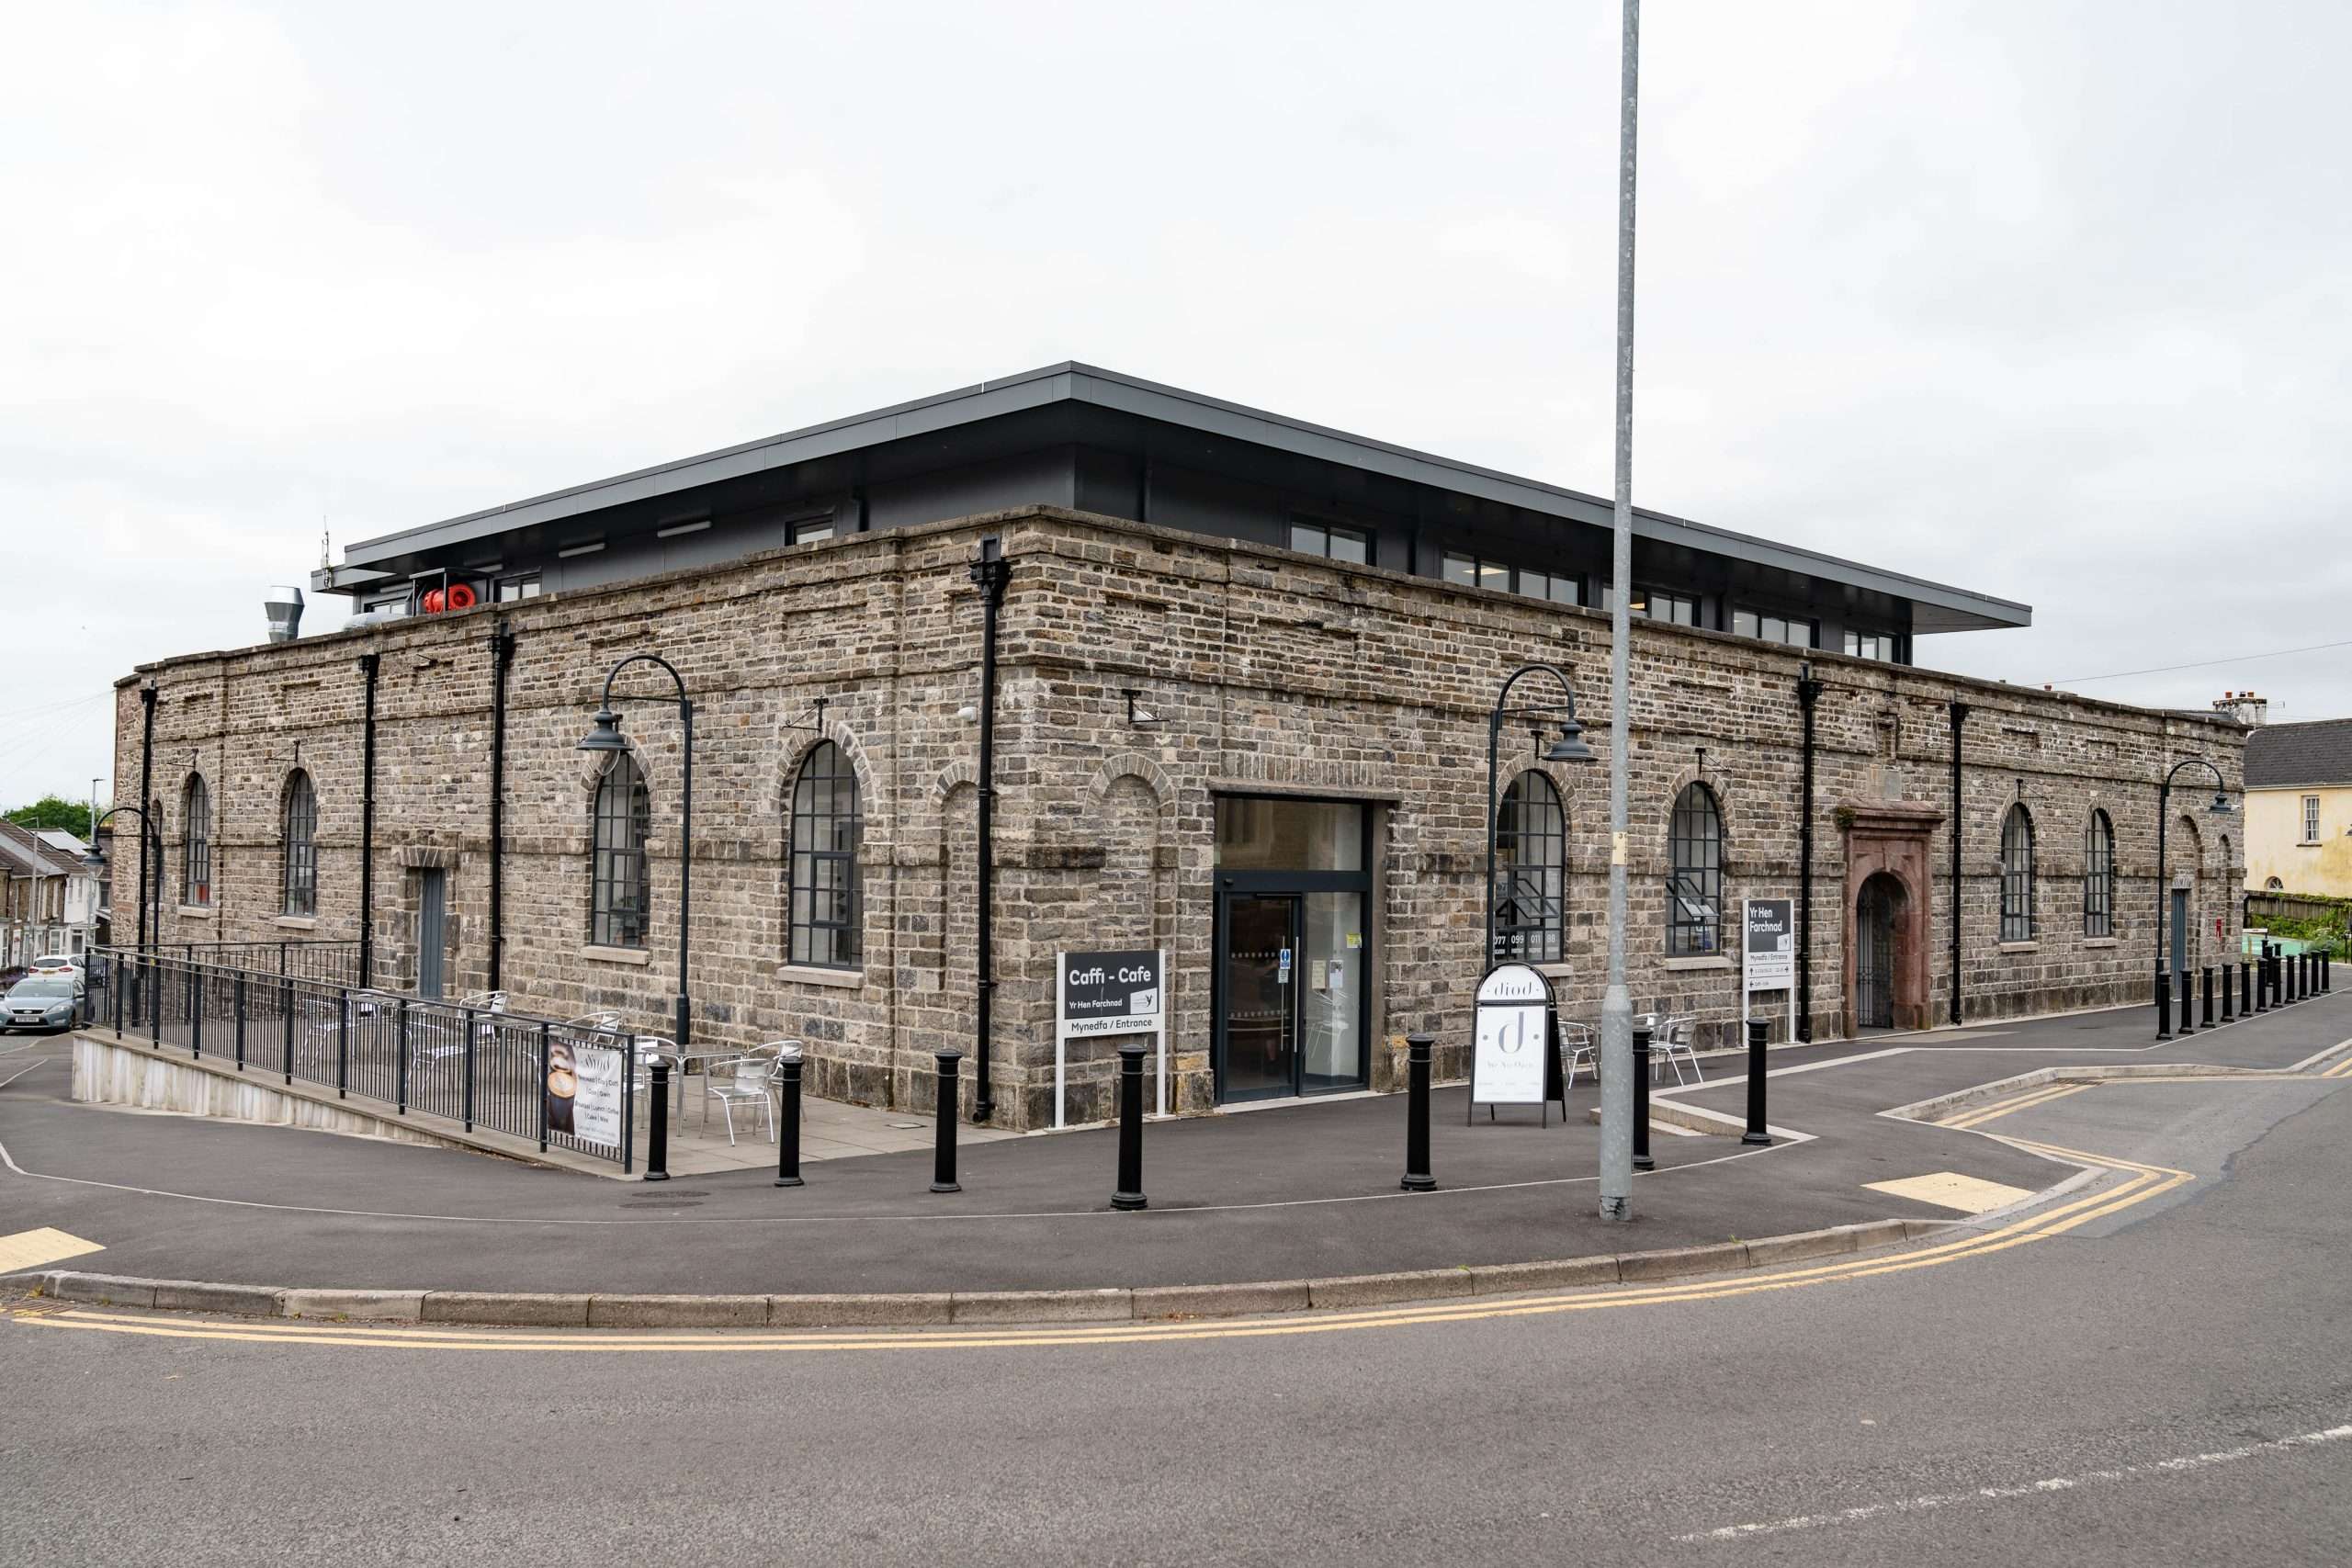 Vulnerable’ market hall renovated and brought back into active use